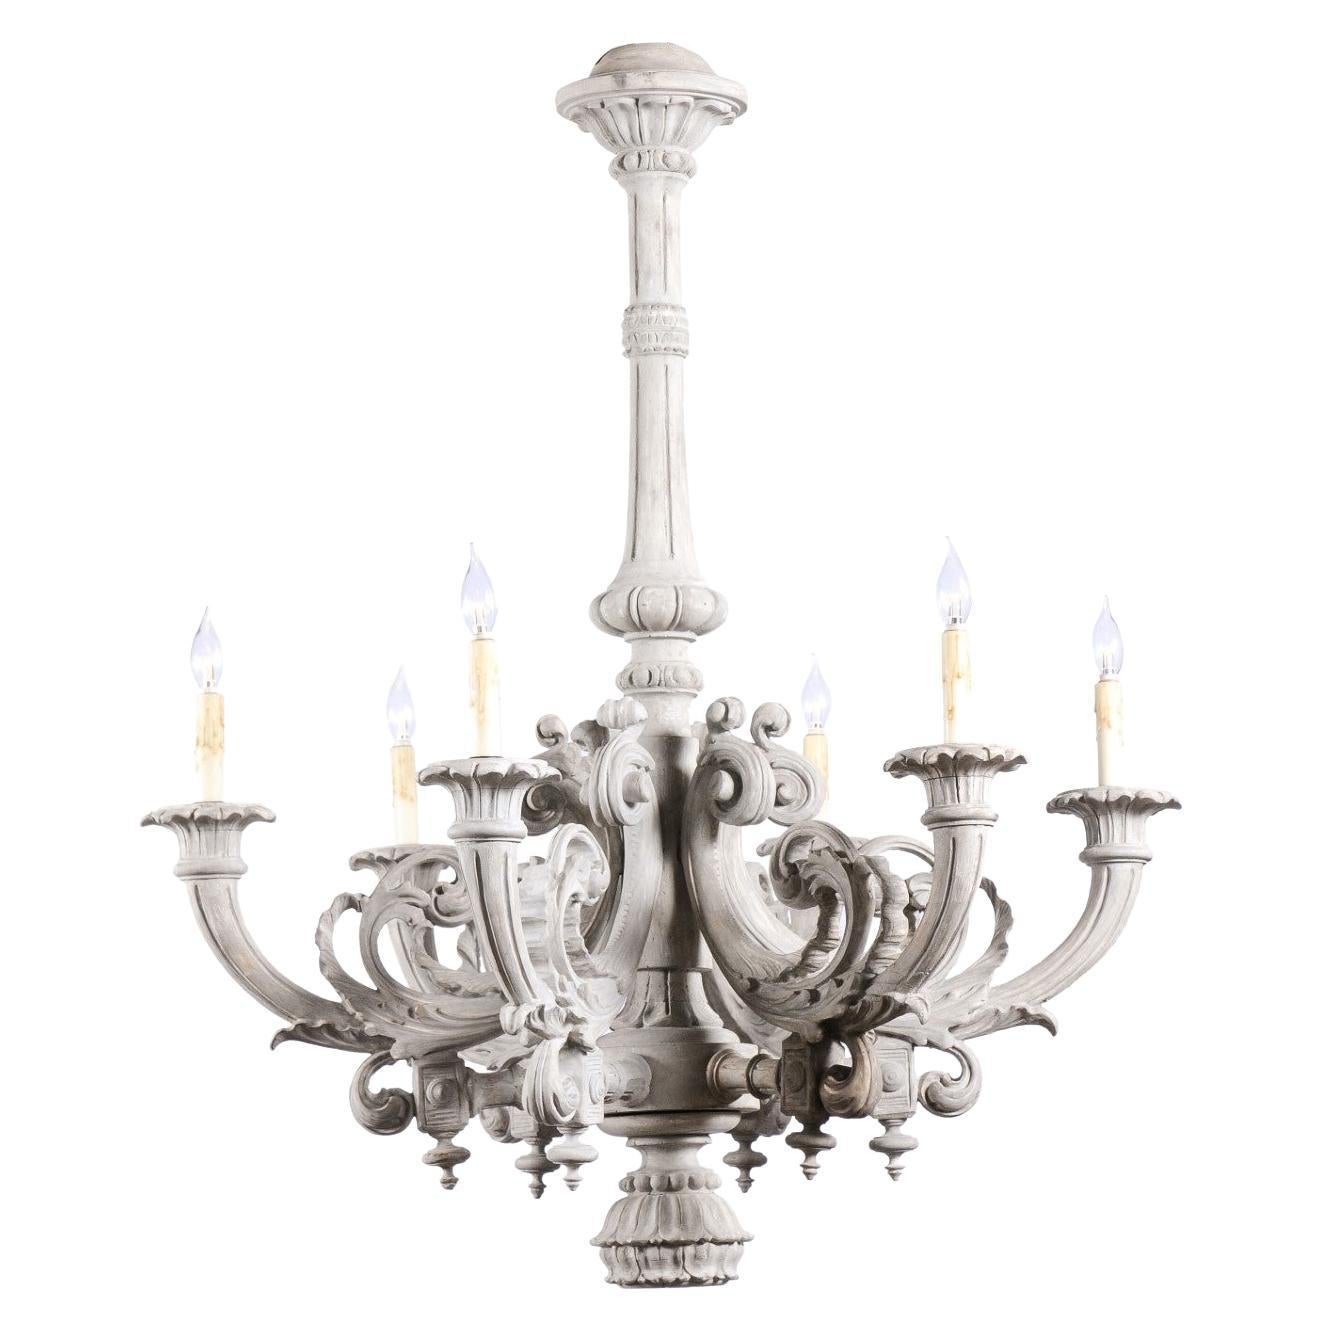 French Turn of the Century Painted Six-Light Chandelier with Scrolling Arms